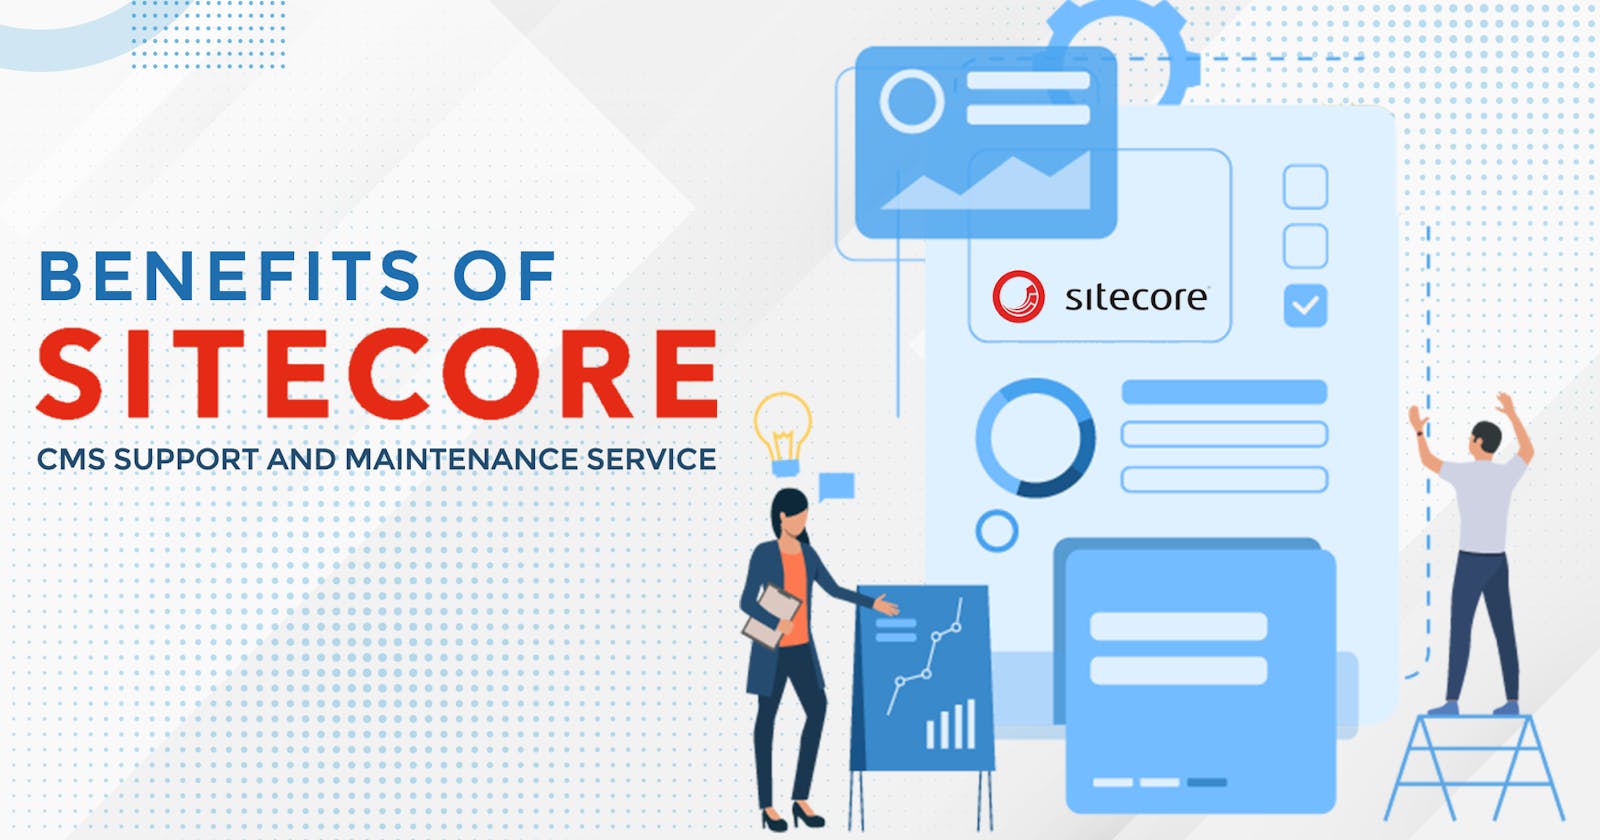 The Benefits of Sitecore CMS Support and Maintenance